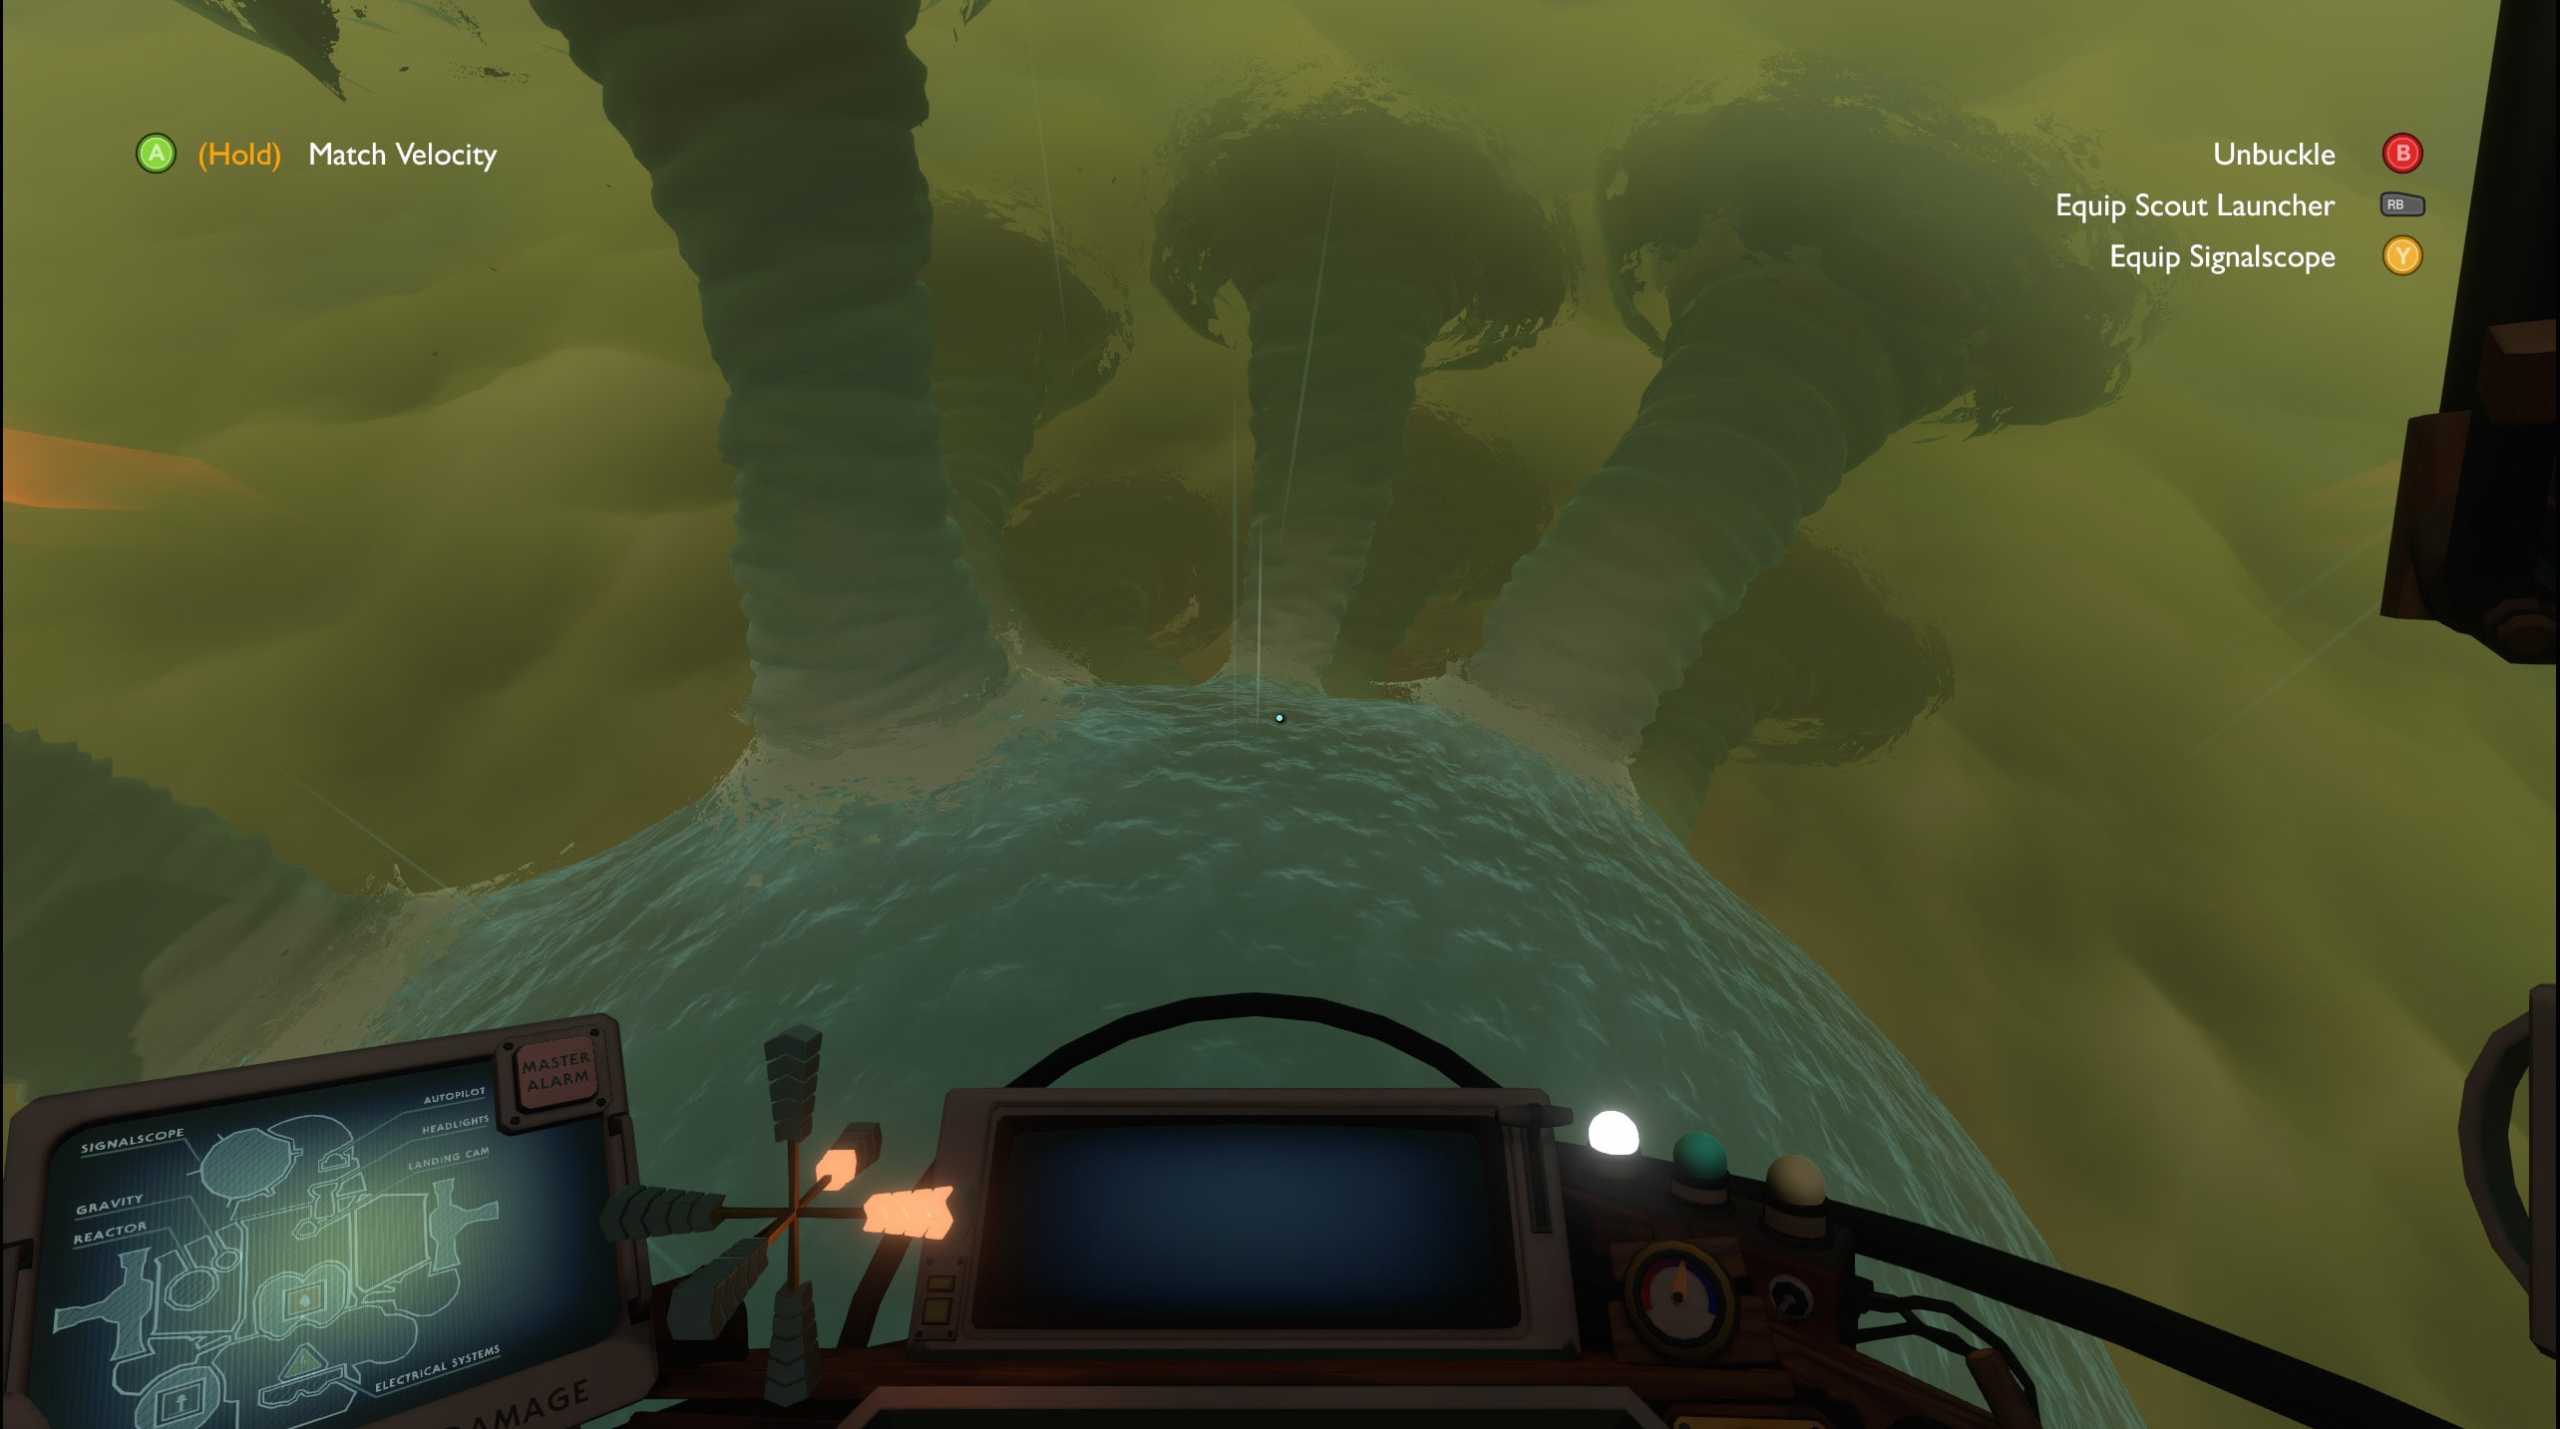 Screenshot from Outer Wilds. Shows an alien planet with a large body of water. The sky is cloudy and several hurricanes can be seen. There are also a few UI elements.